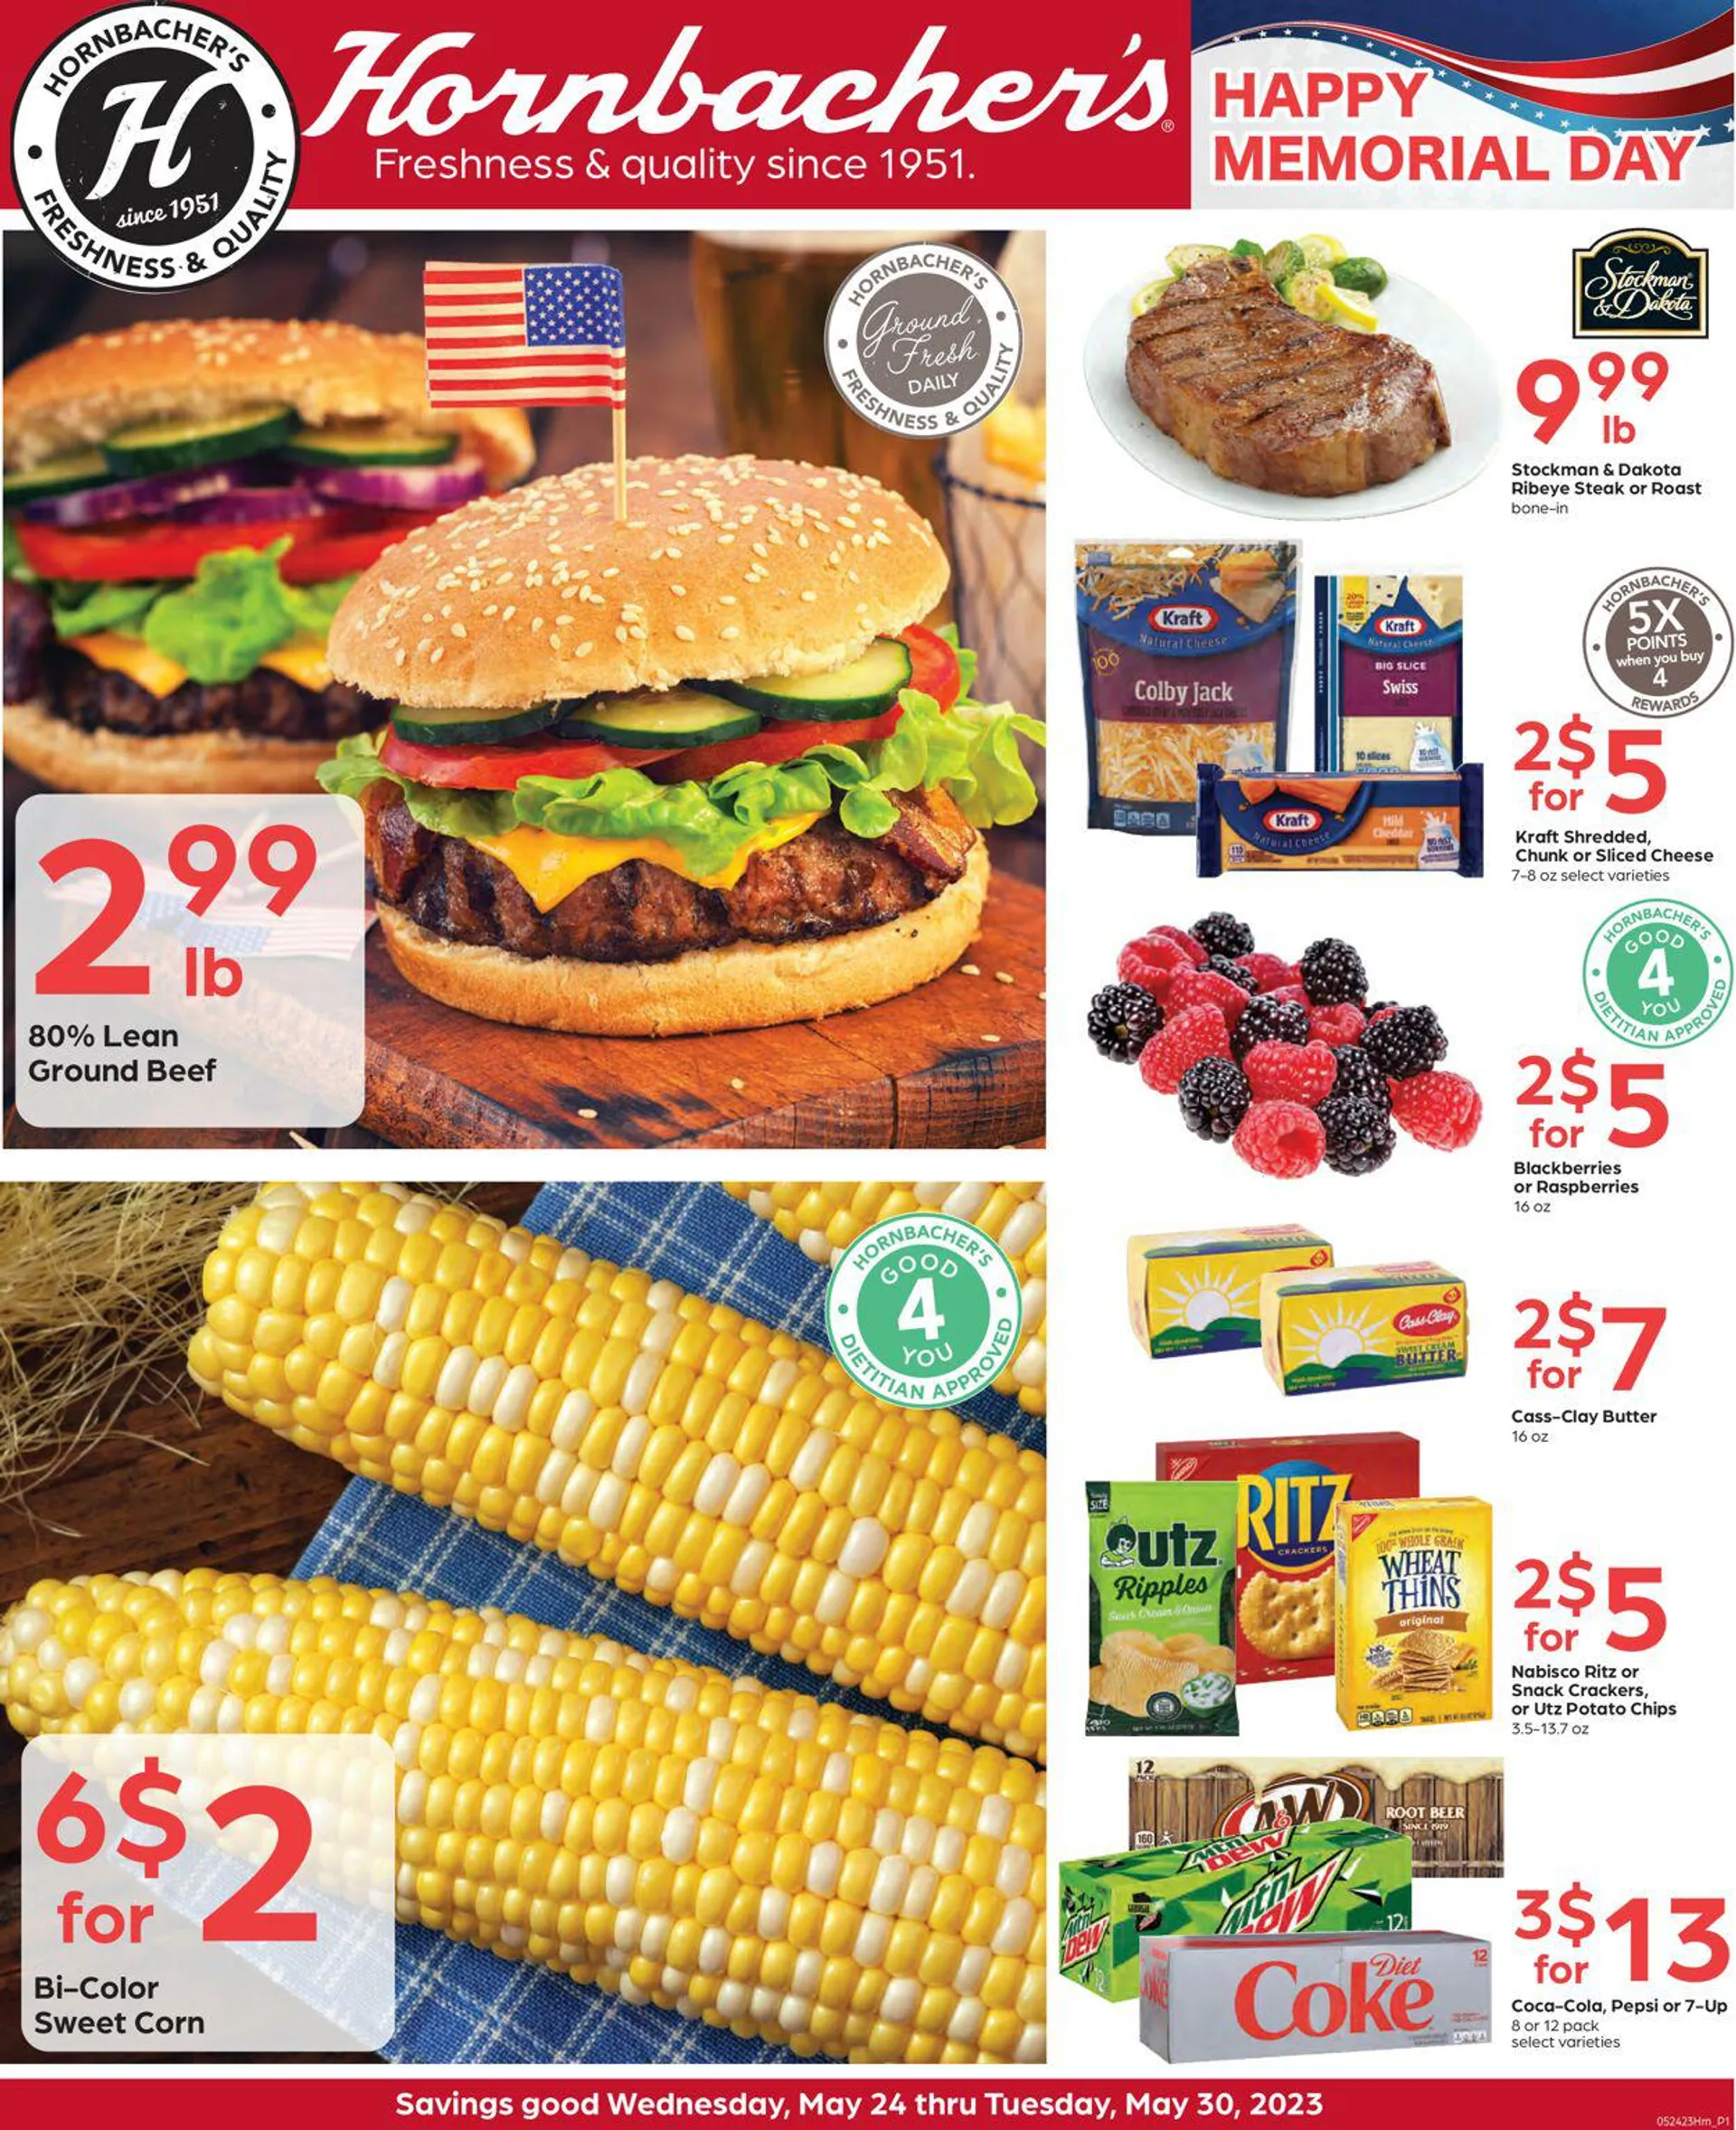 Hornbachers Current weekly ad - 1